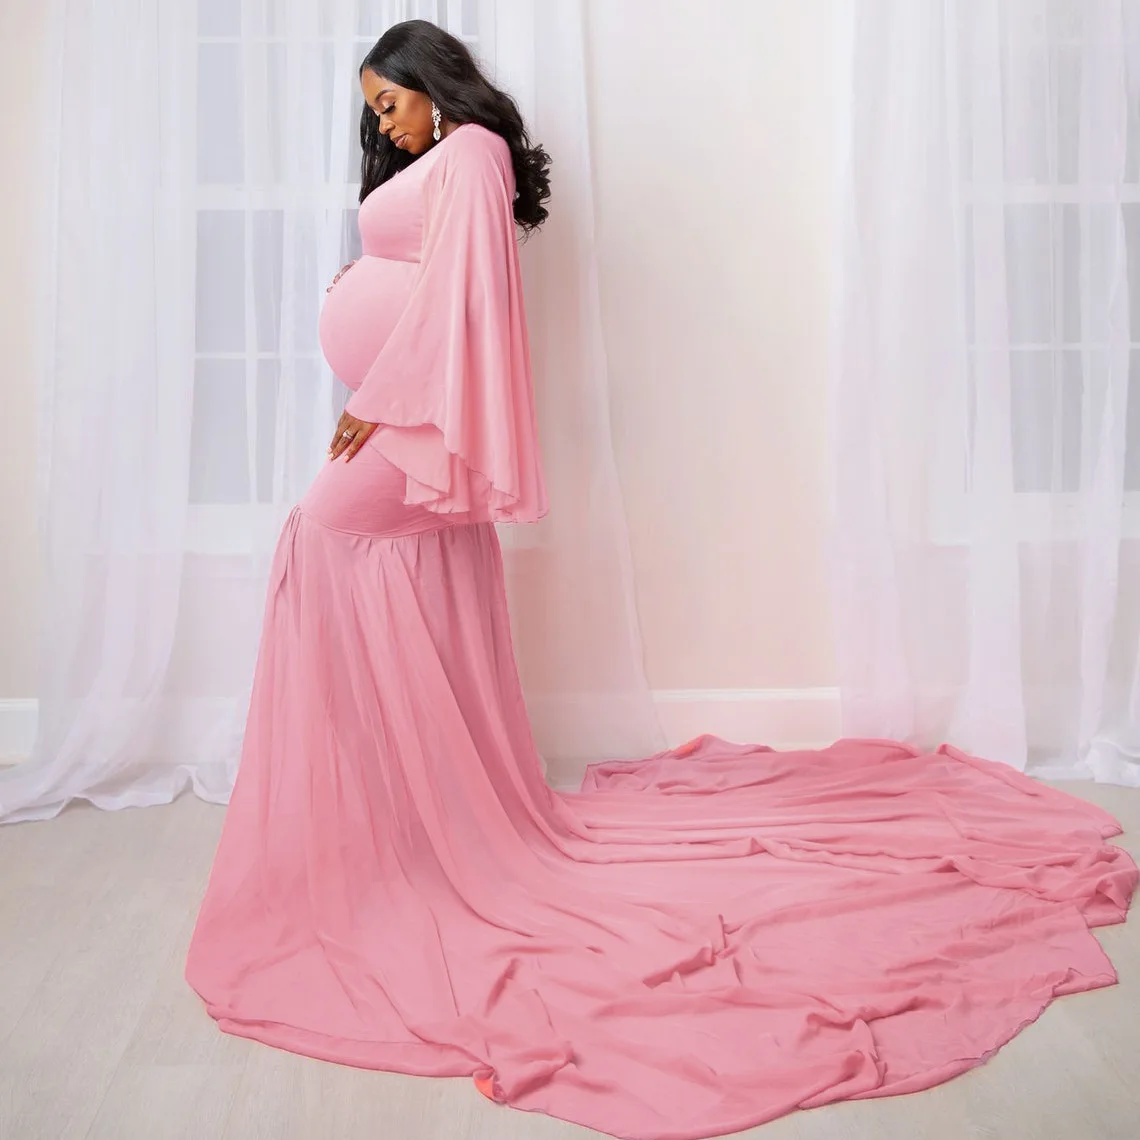 Enlarge Maternity Dresses for Photo Shoot  Pregnancy  Baby Shower V-neck Long Sleeve Loose Extended Skirt Tail Sleeved Chiffon  Pink